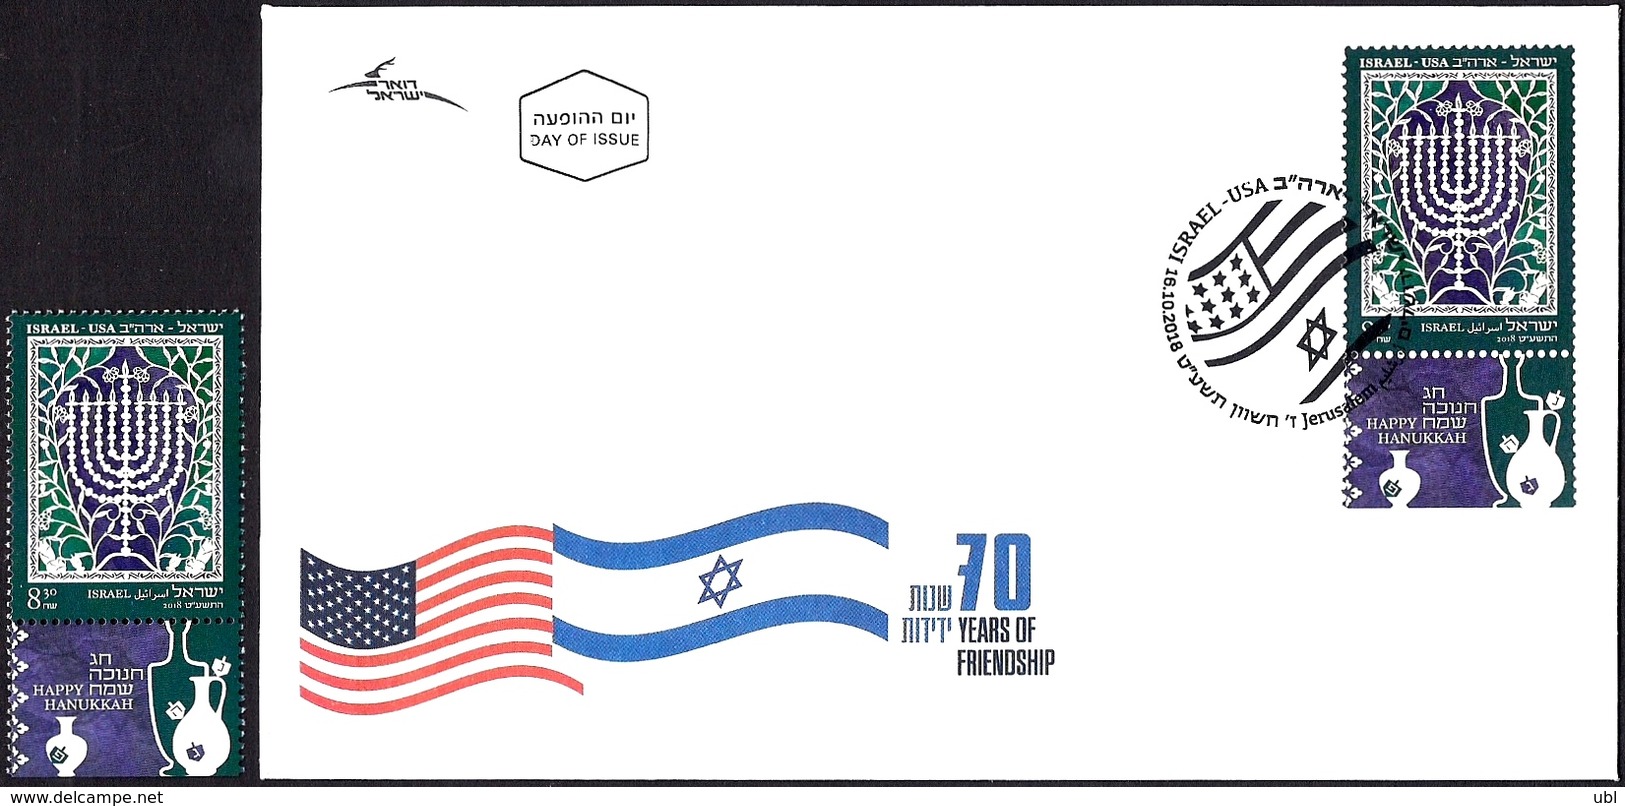 ISRAEL 2018 - Joint Issue With The USA - The Hanukkah Eight-Candles Candelabra - A Stamp With A Tab - MNH & FDC - Jewish